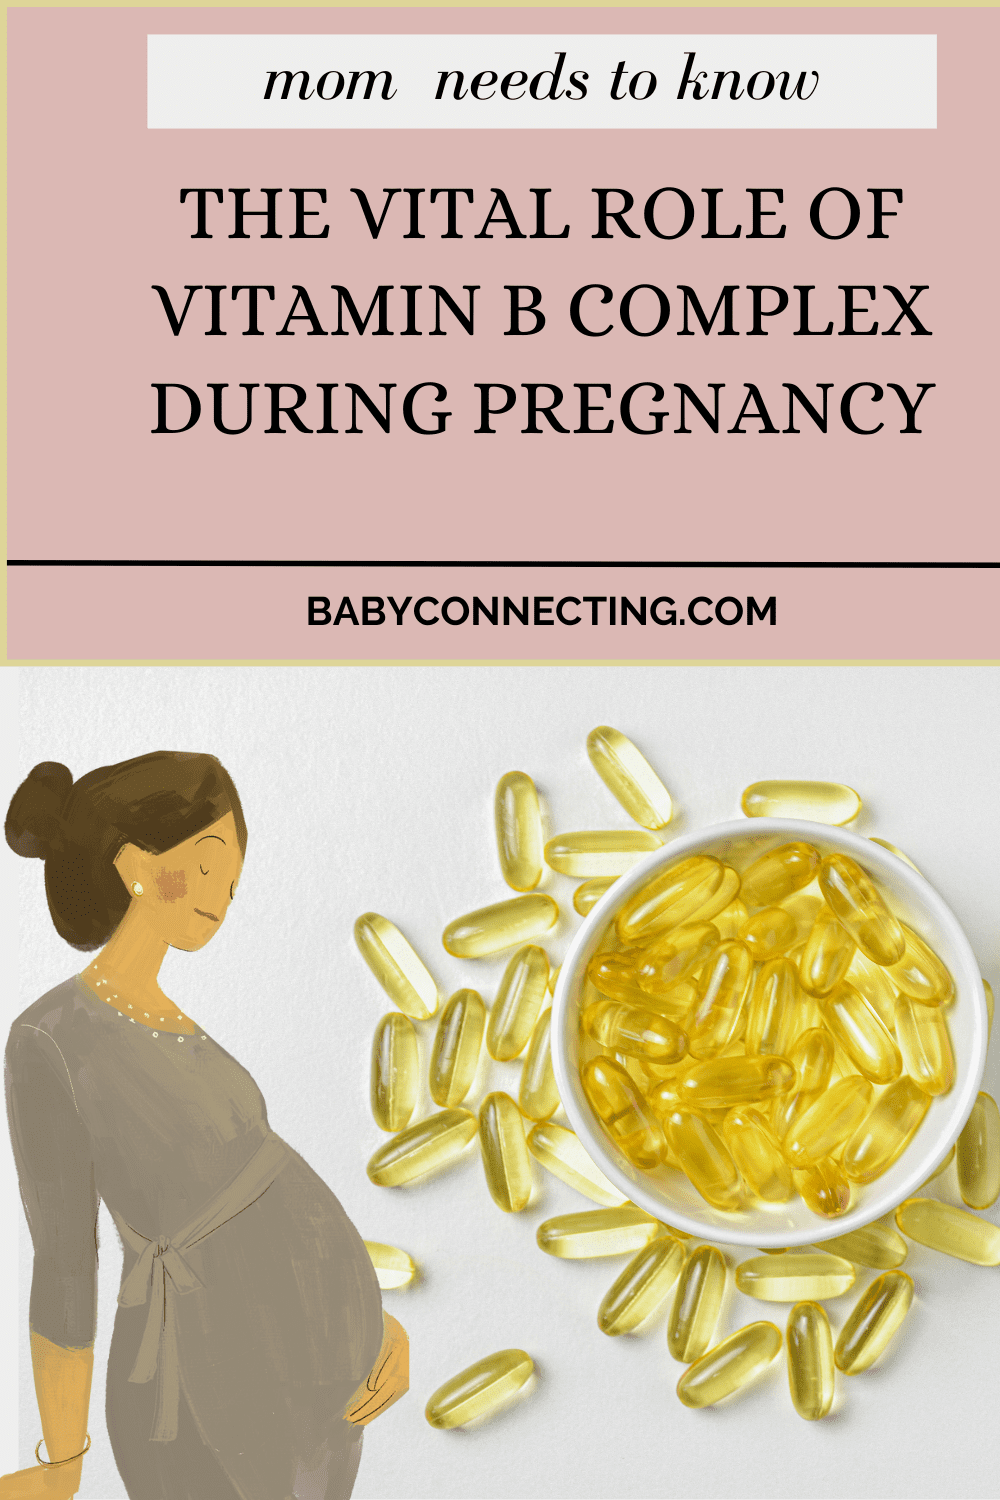 The Vital Role of Vitamin B Complex During Pregnancy